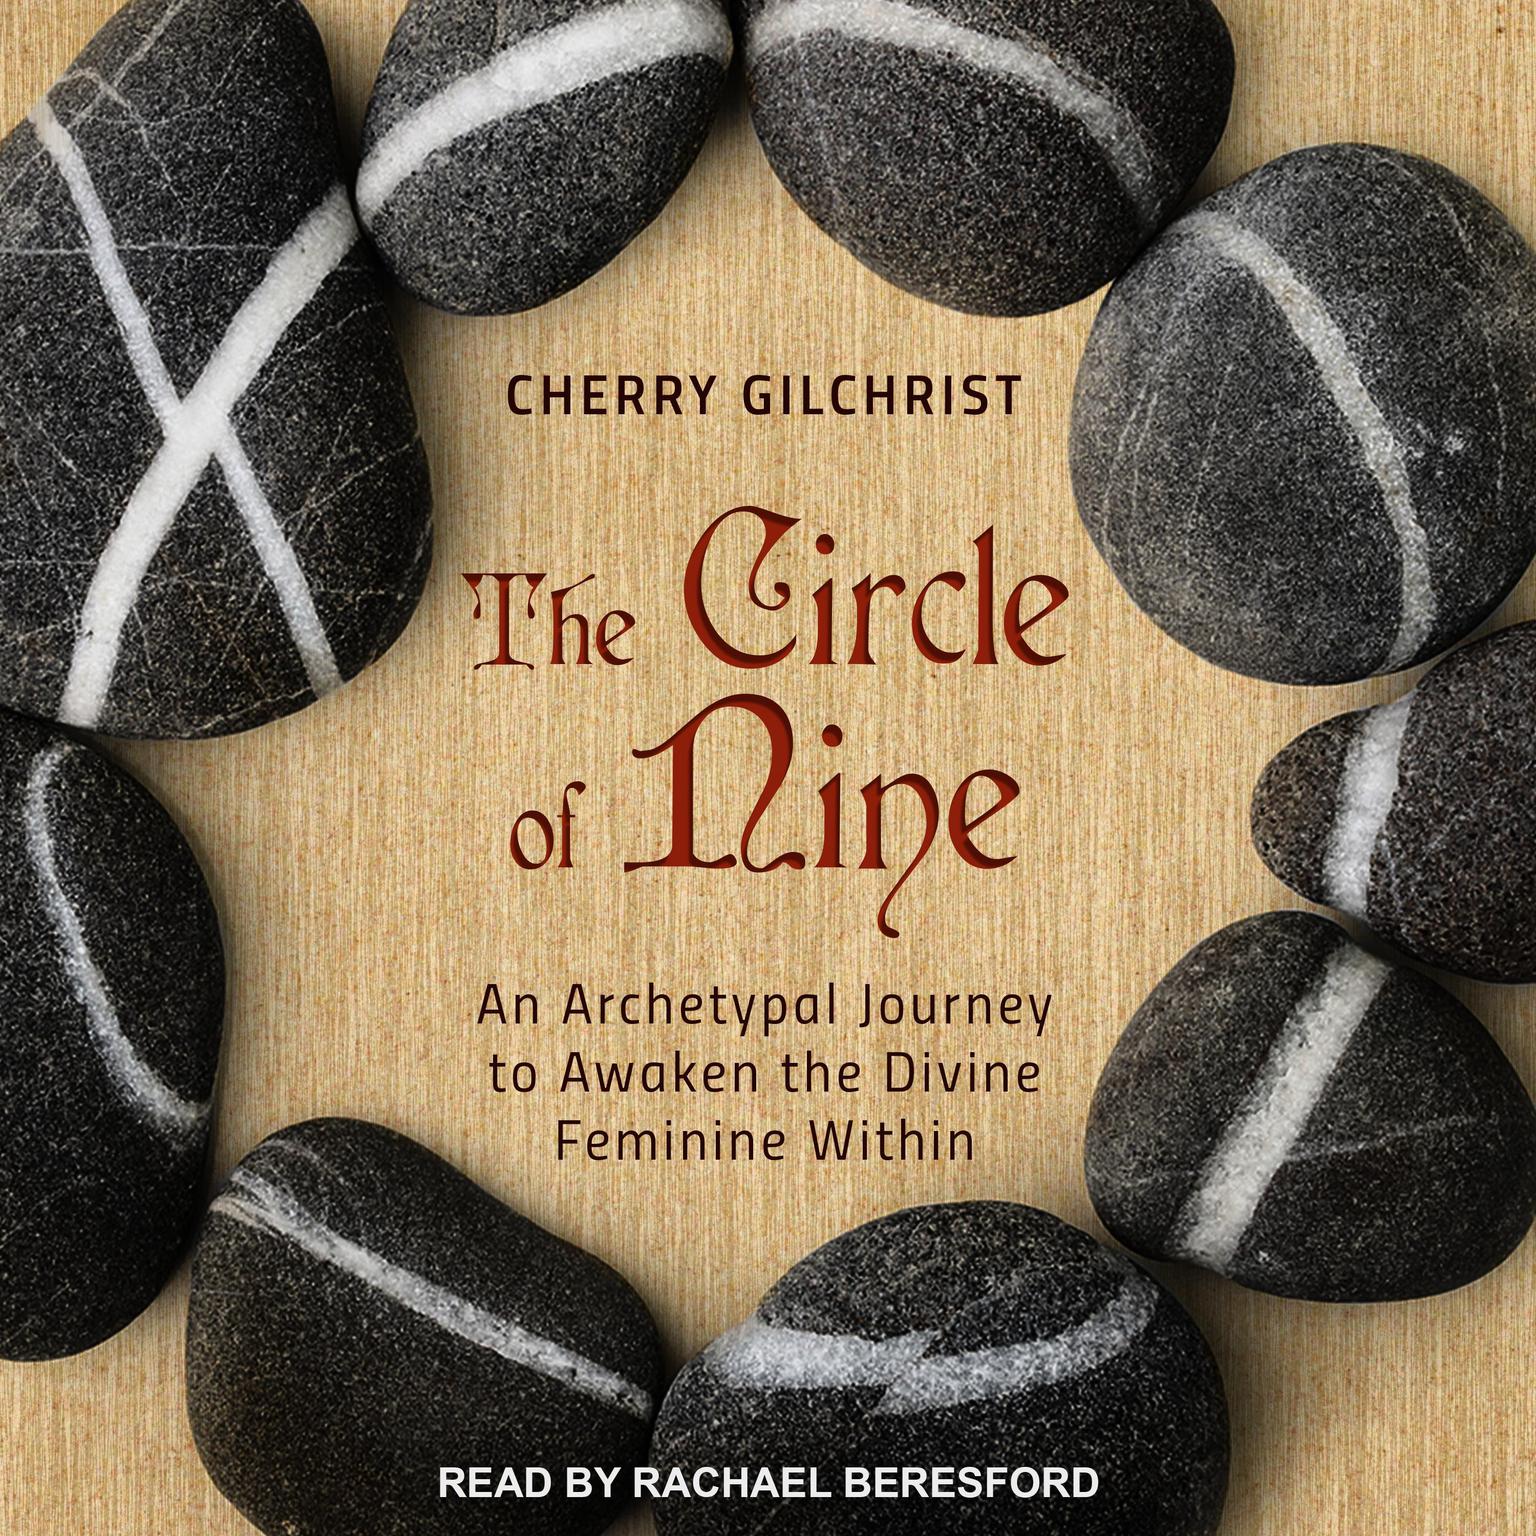 The Circle of Nine: An Archetypal Journey to Awaken the Divine Feminine Within Audiobook, by Cherry Gilchrist